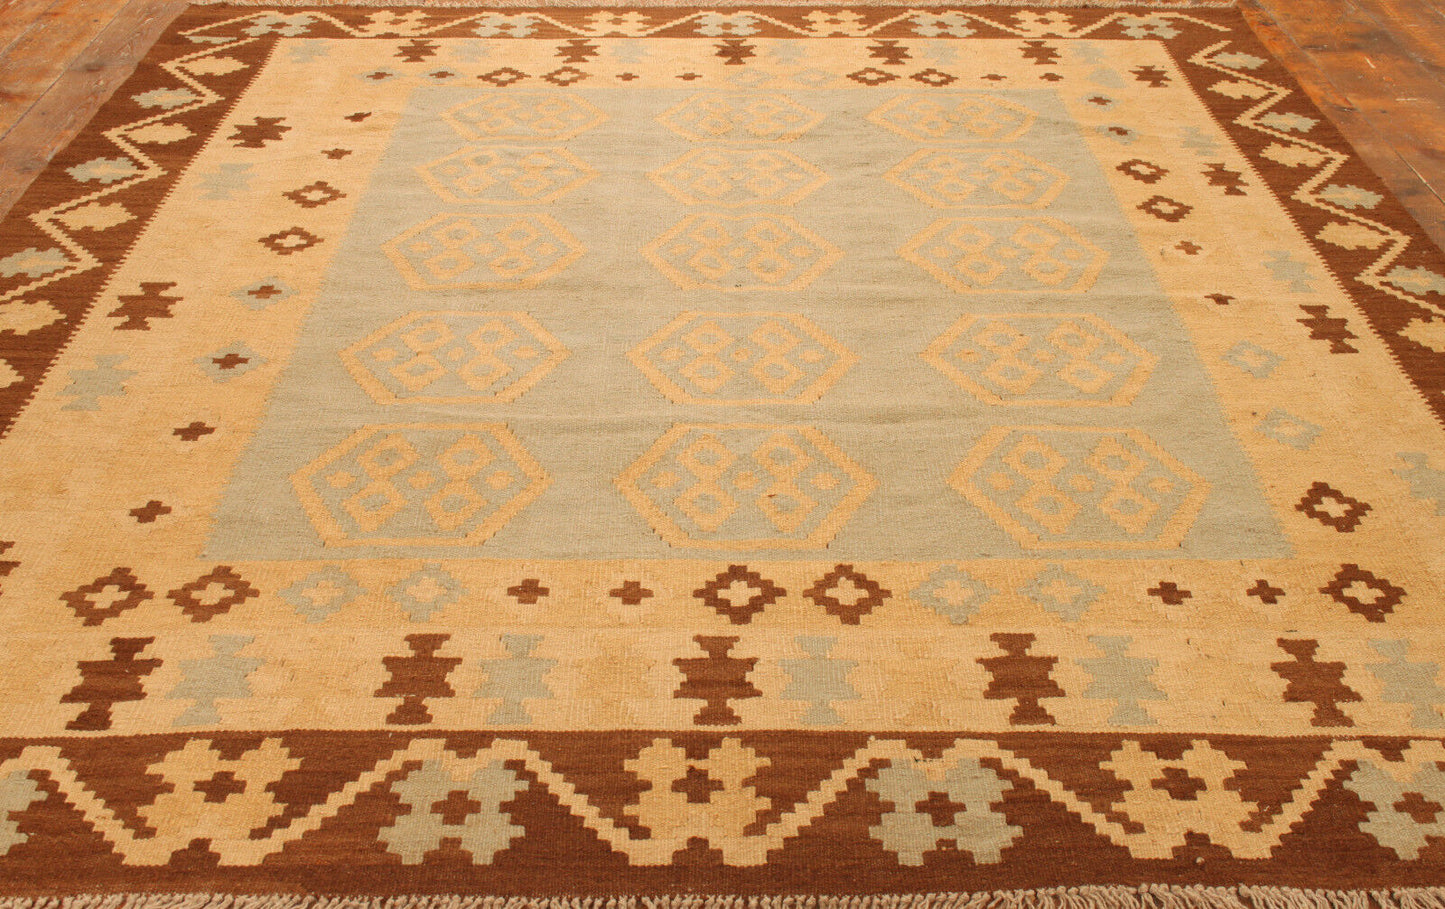 Close-up of the shades of grey, beige, and brown on the Handmade Vintage Afghan Flatweave Kilim